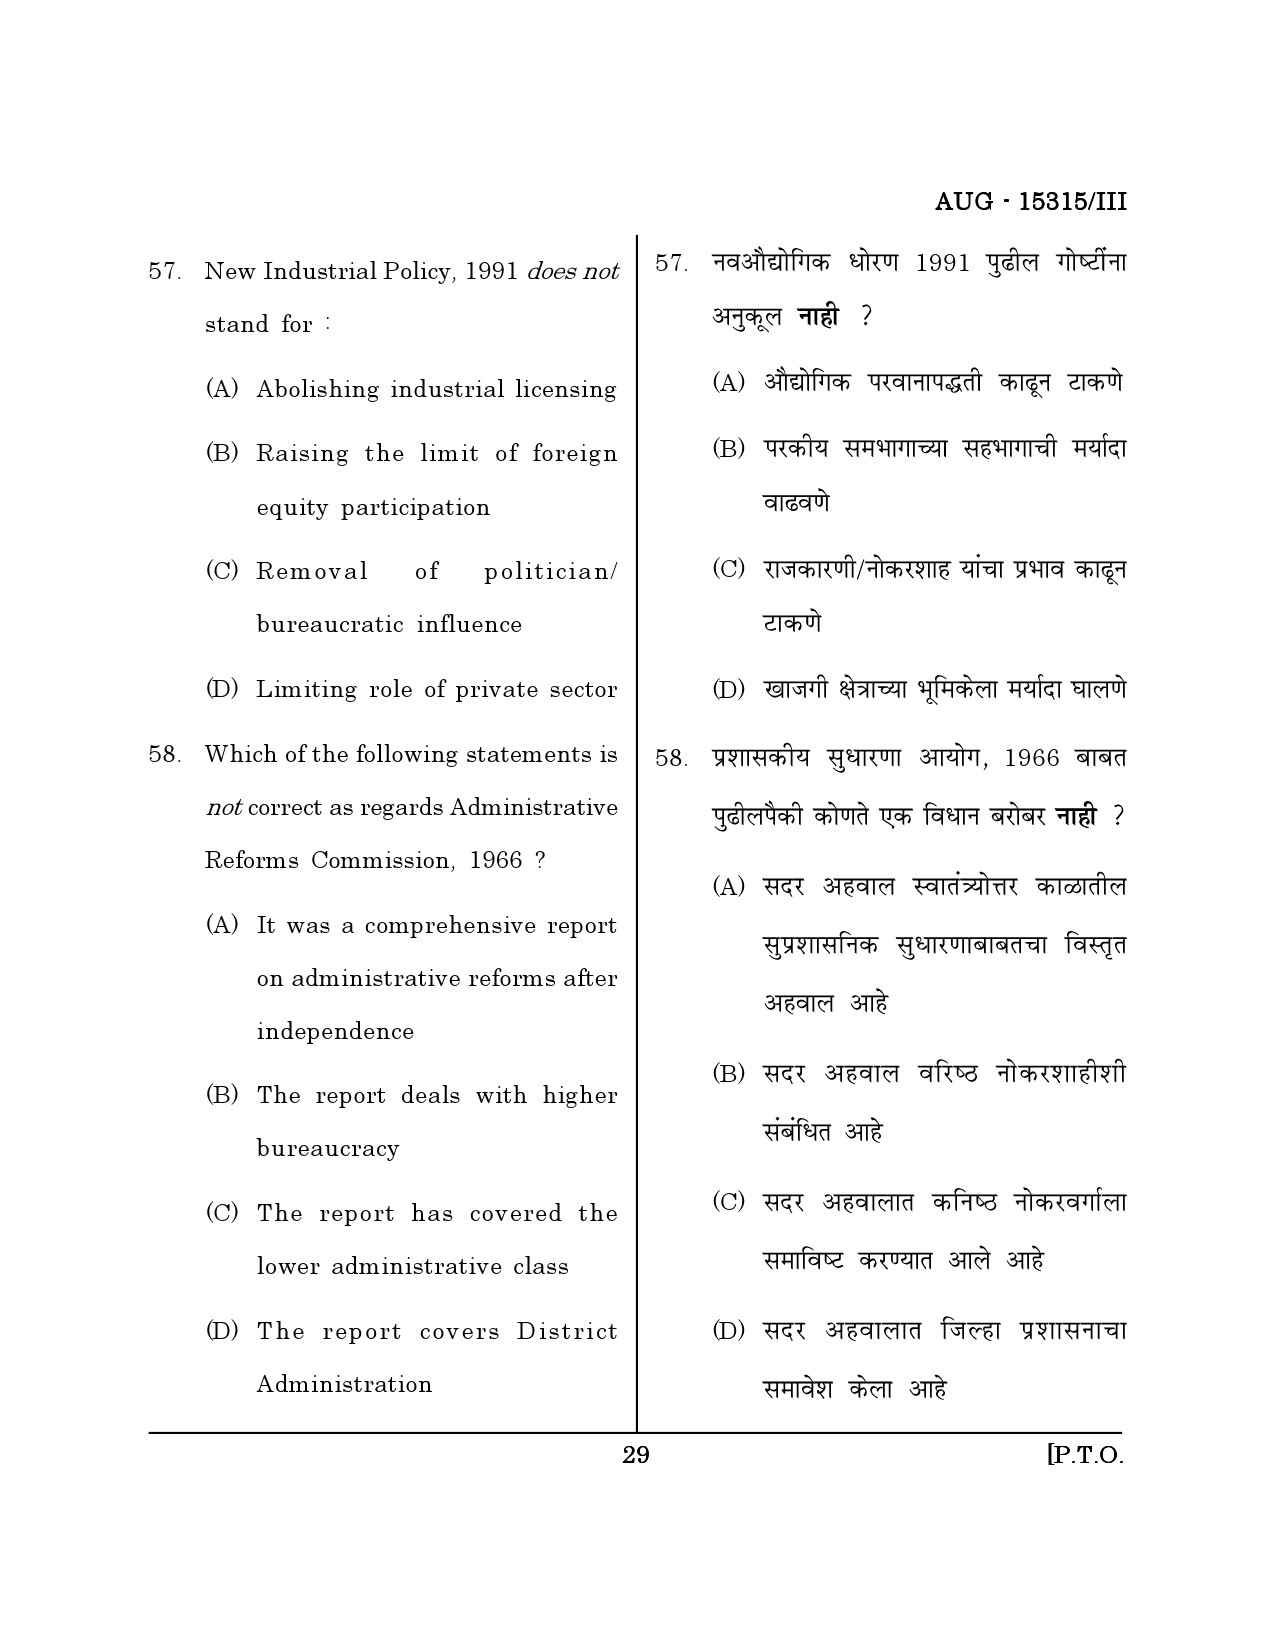 Maharashtra SET Political Science Question Paper III August 2015 28